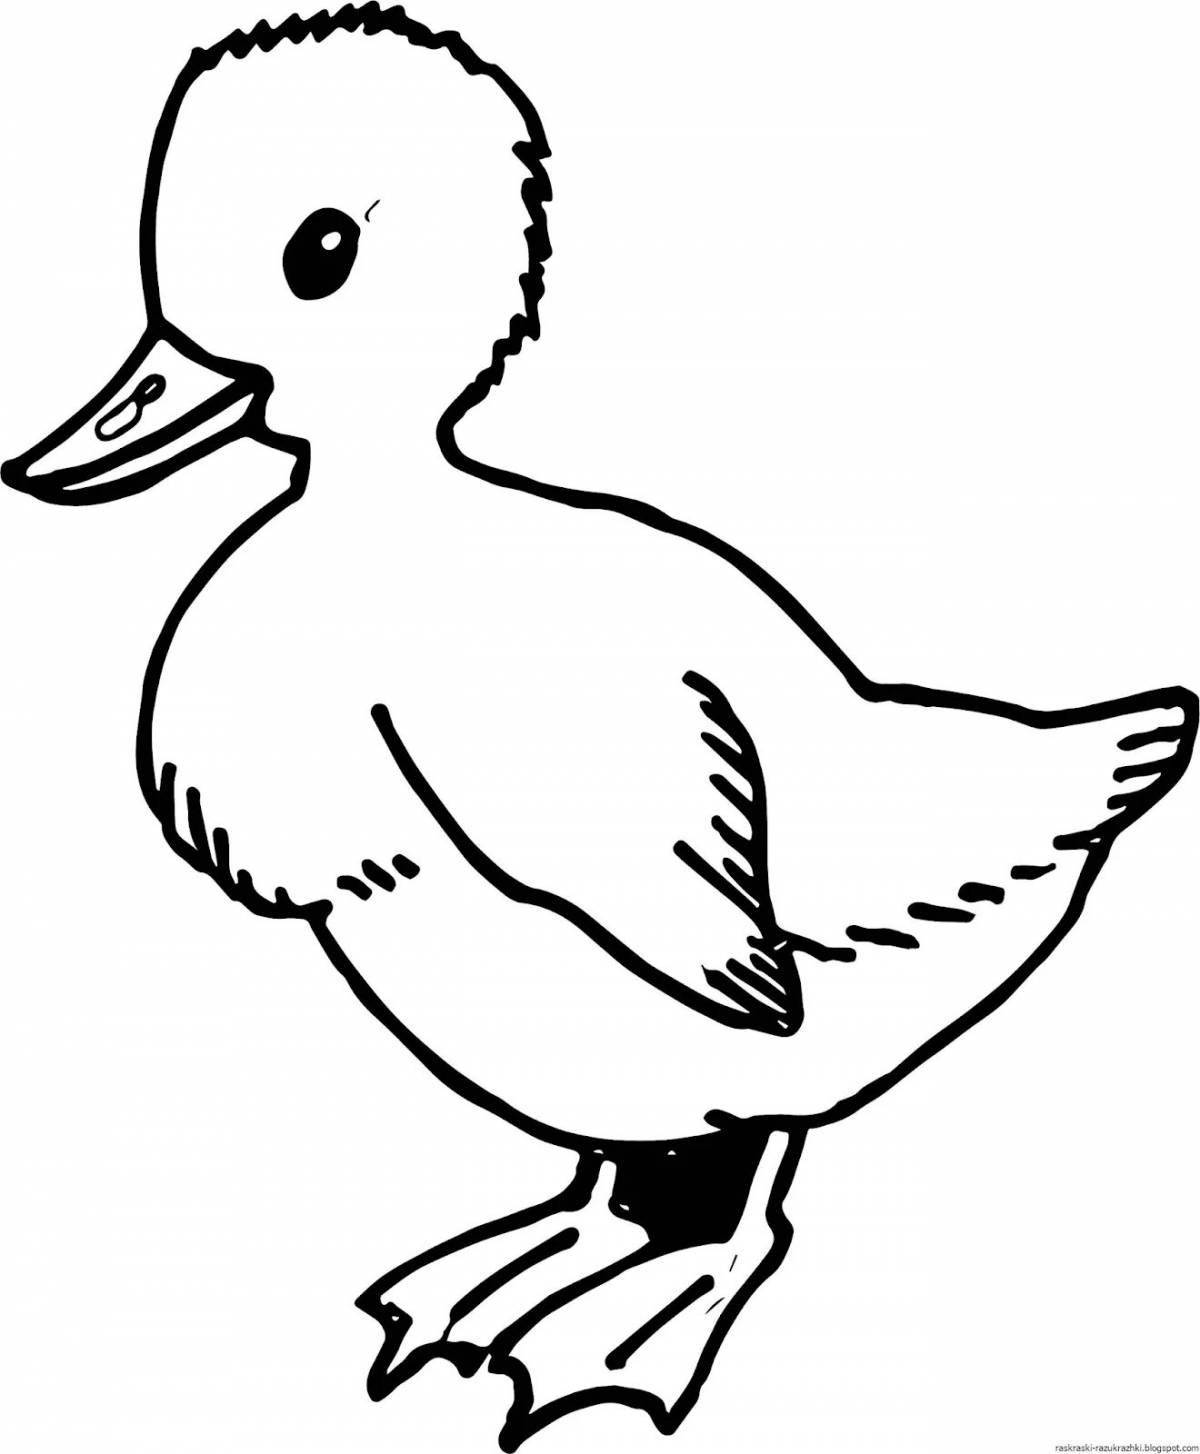 Great duck coloring book for kids